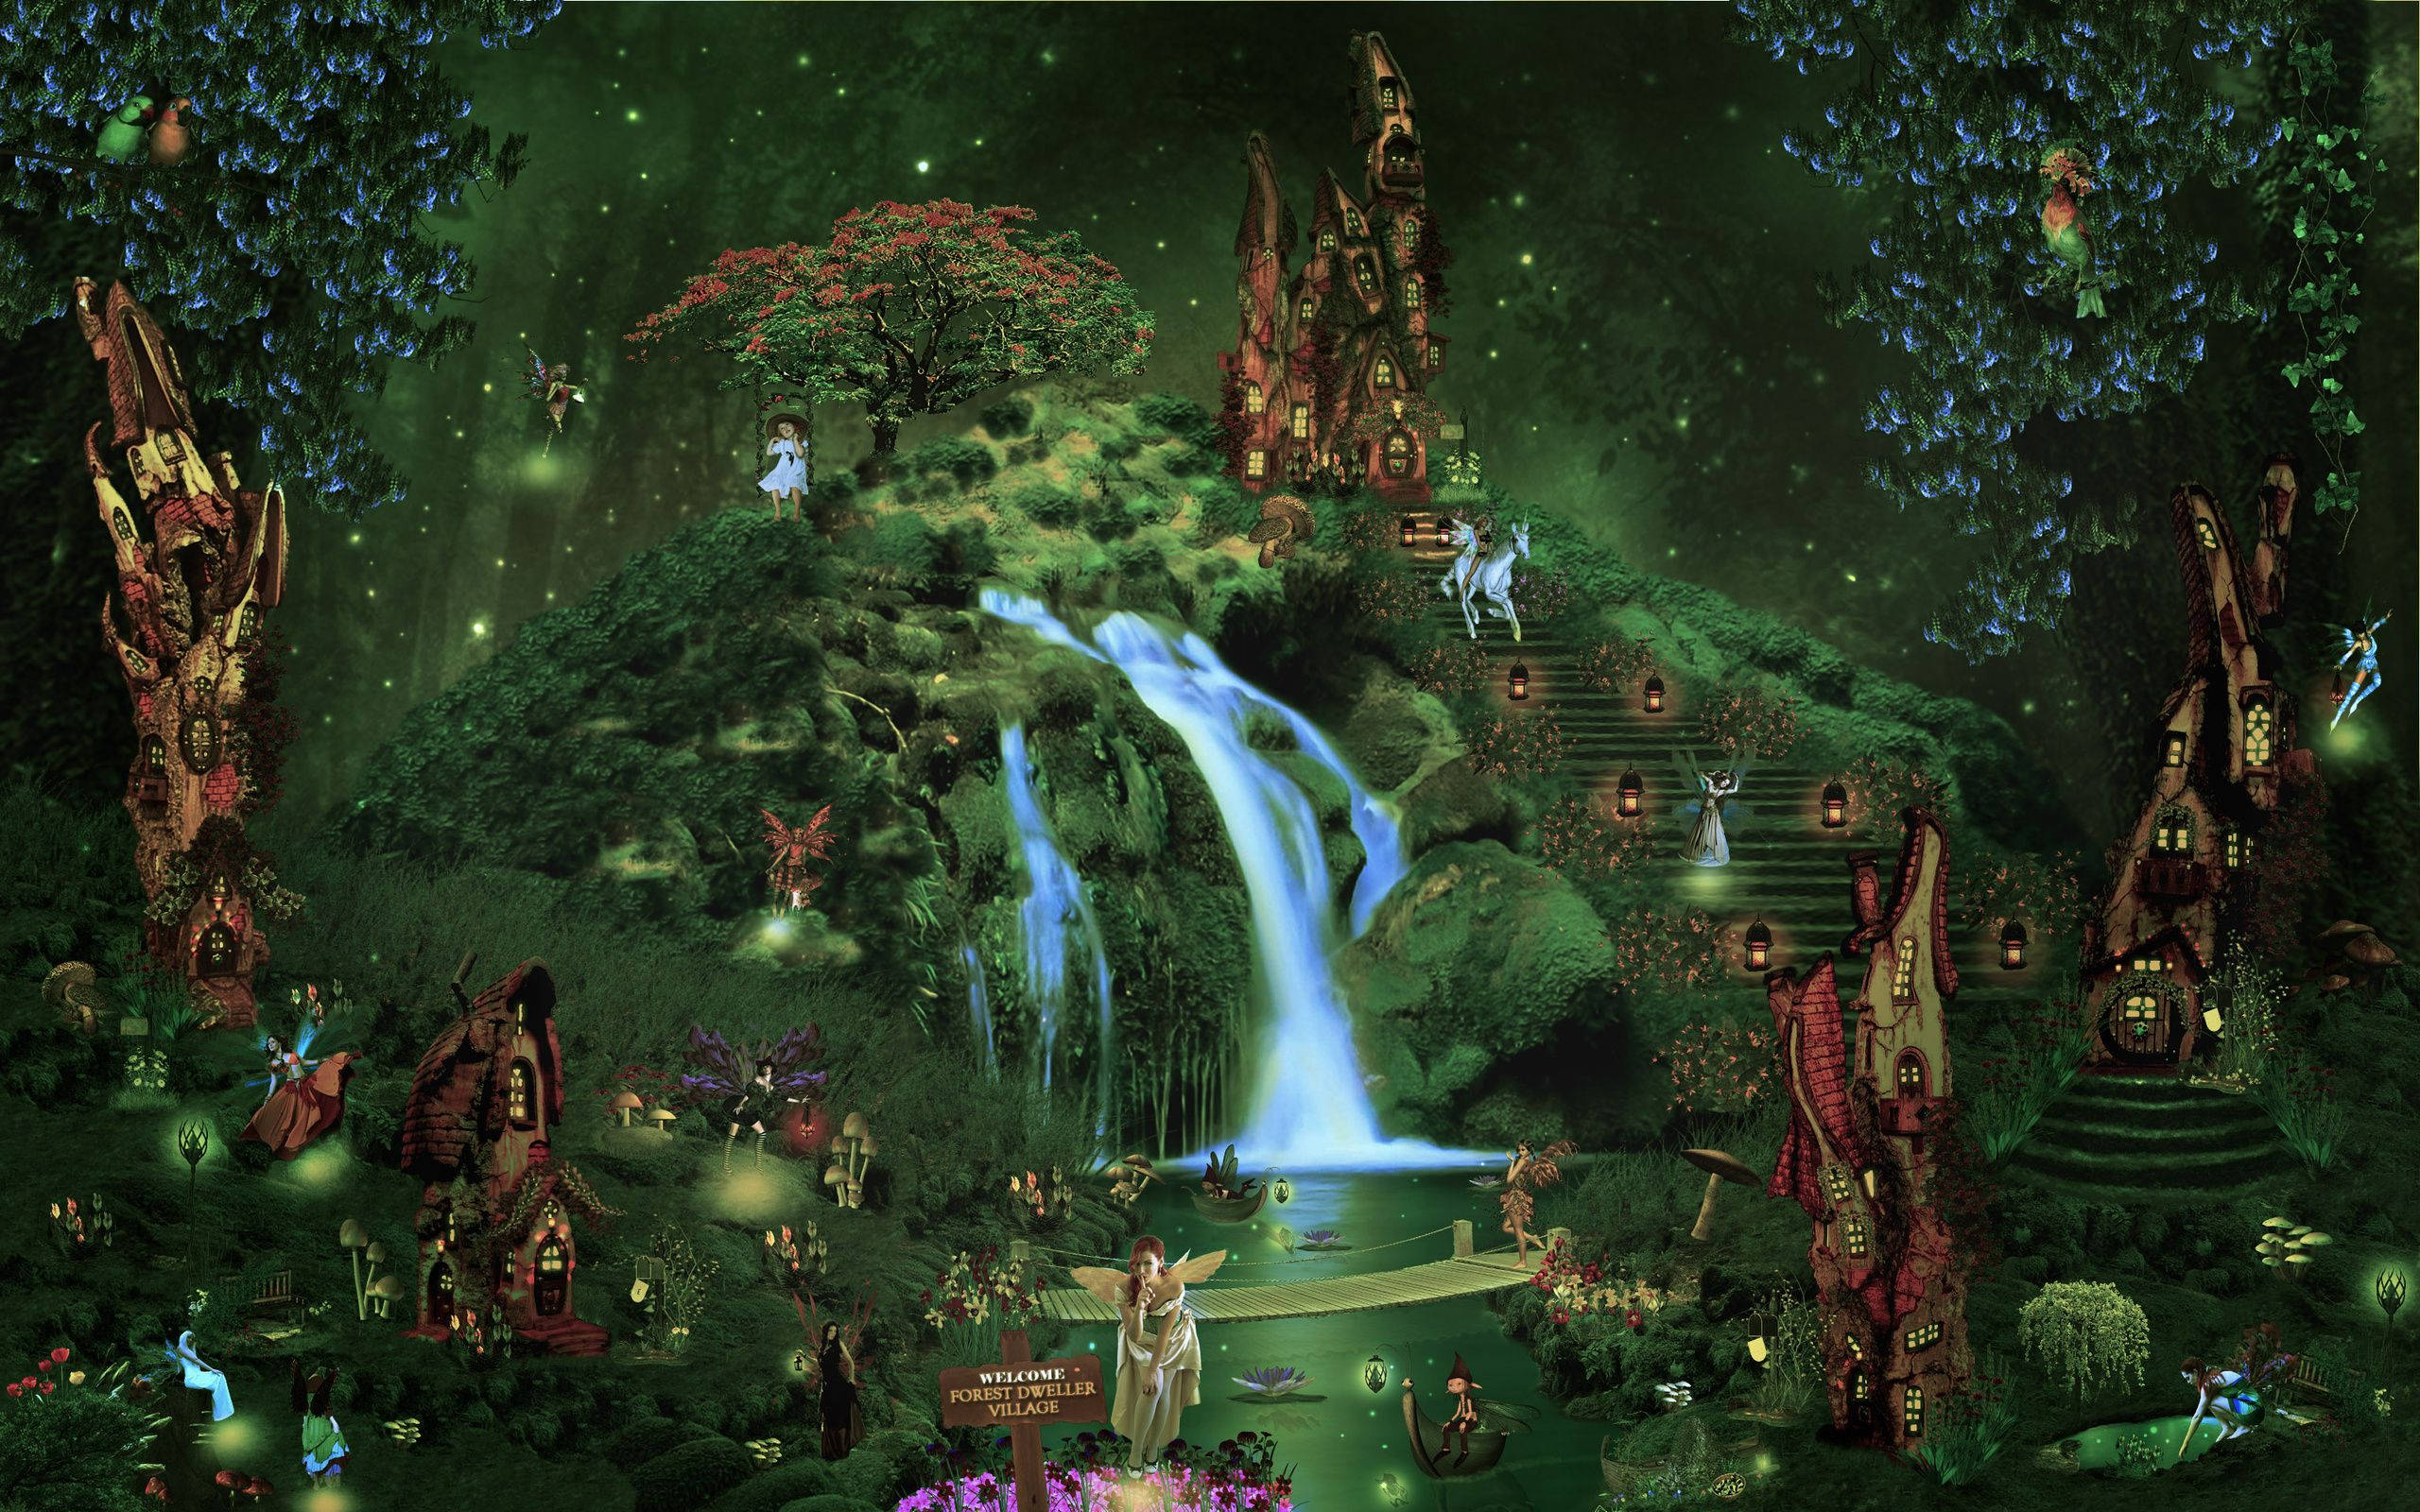 Mystical Fairy Village In The Enchanted Forest Wallpaper